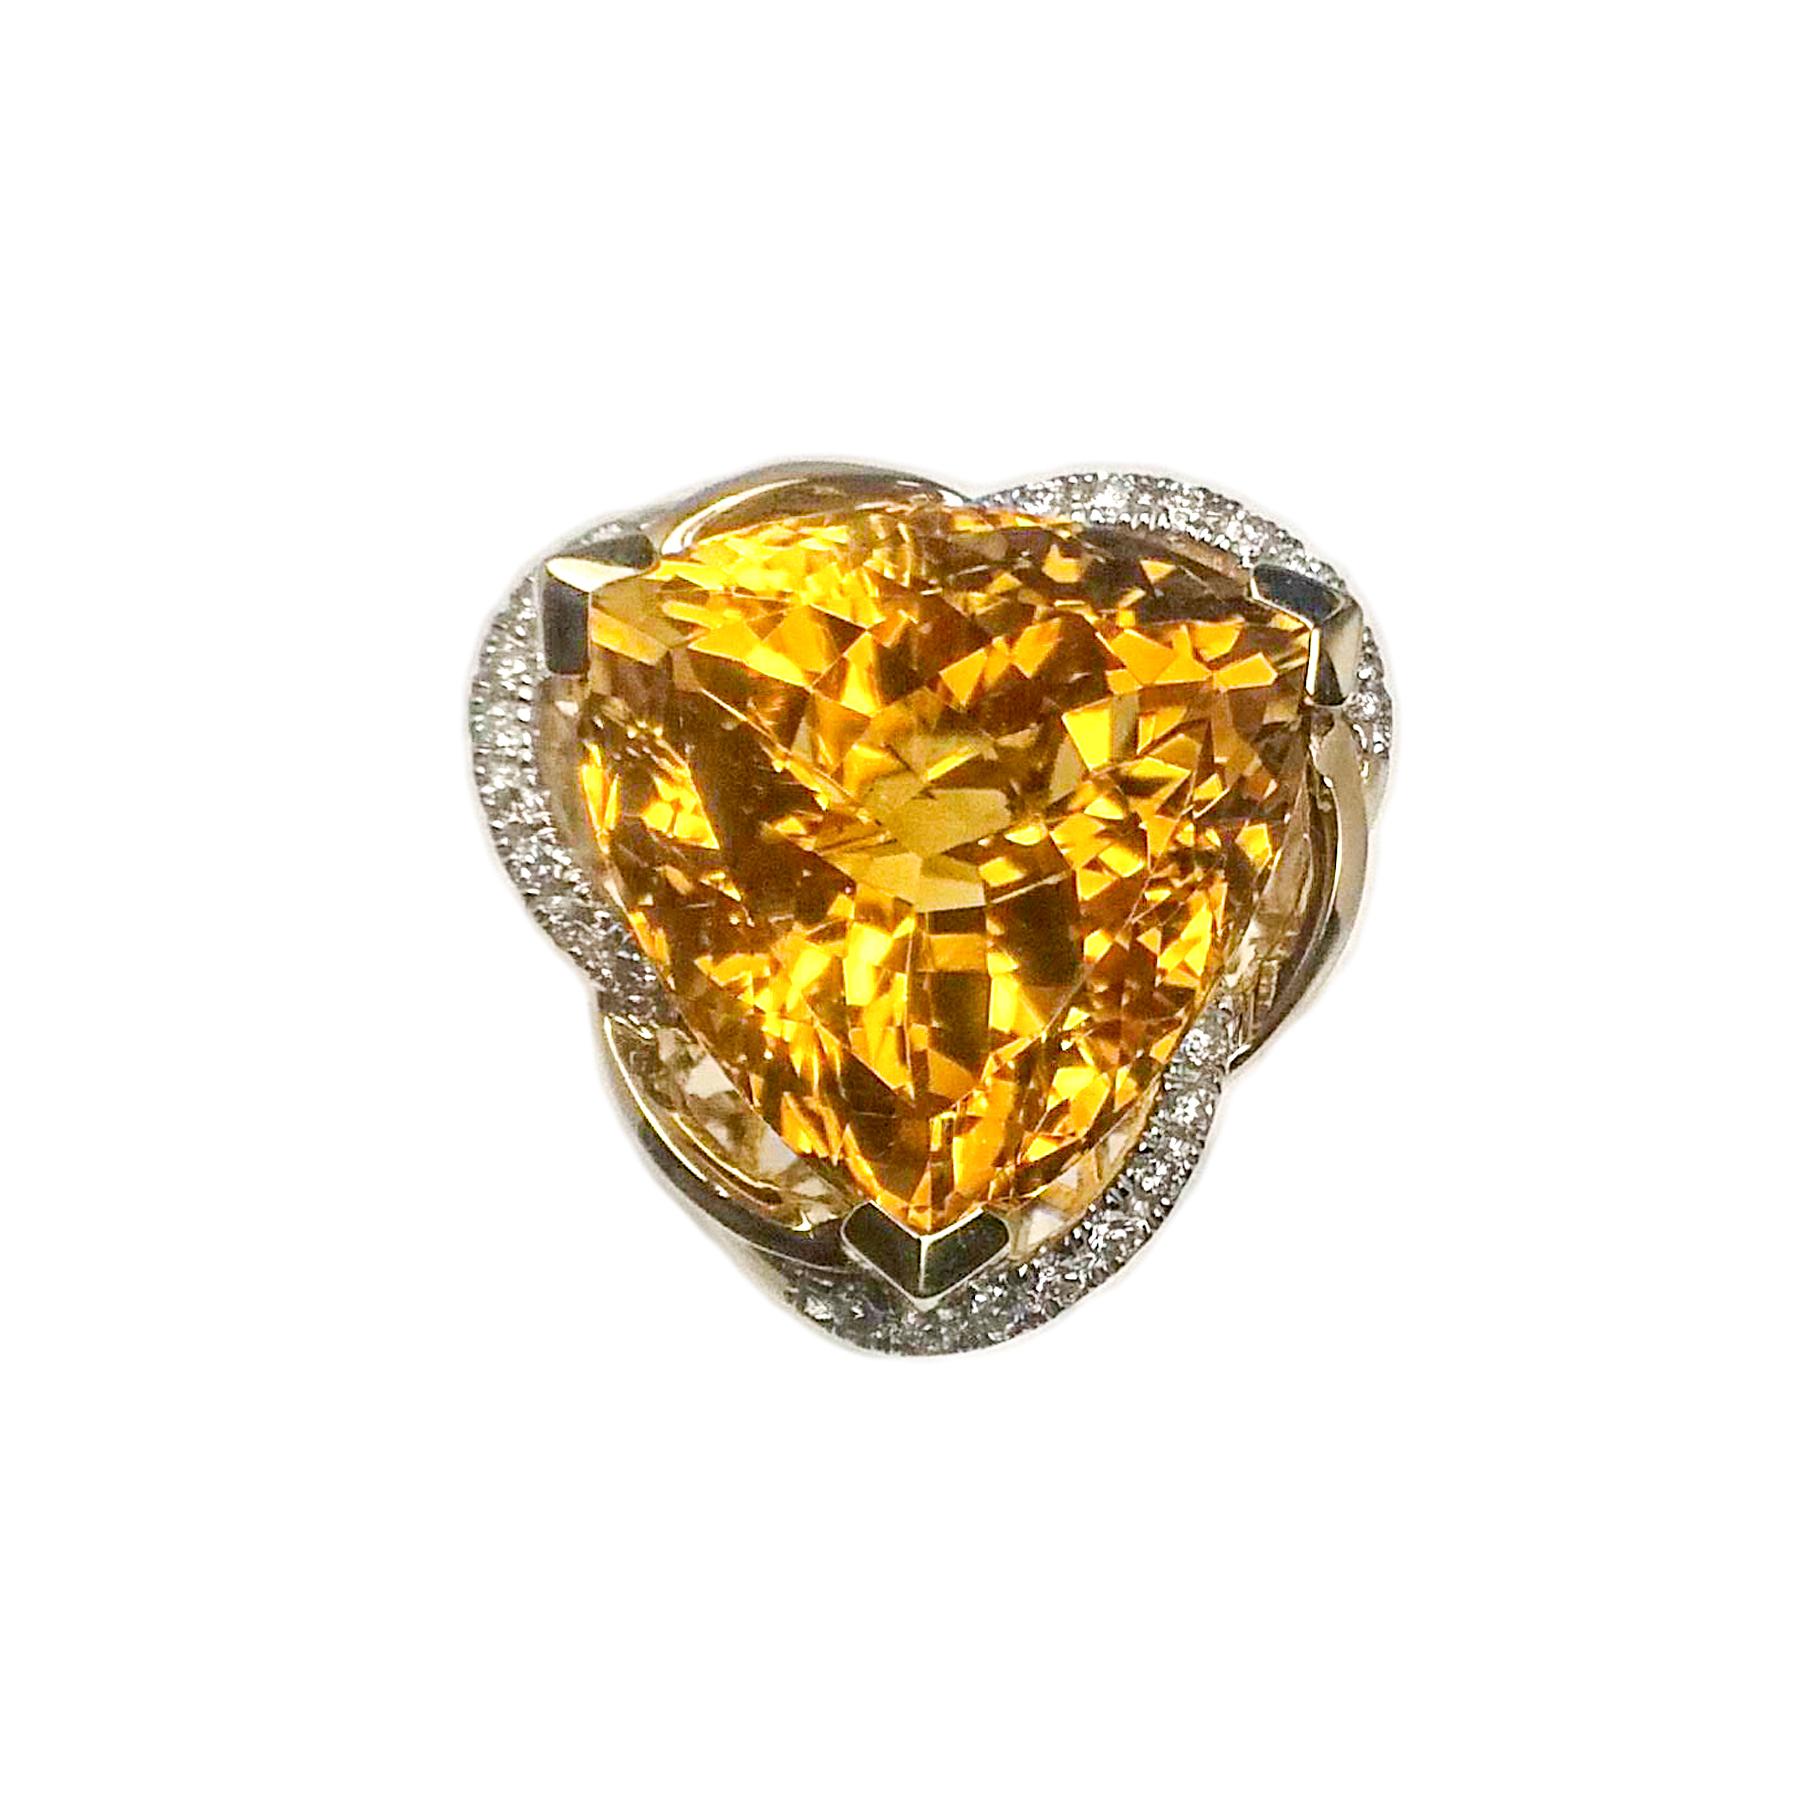 Honey yellow, 13.27 carats citrine and diamond ring. High luster, trillion faceted citrine mounted in high profile basket with 3 prongs. Contemporary handcrafted design with round brilliant diamonds, set in 14 karat yellow gold. Ideal cocktail